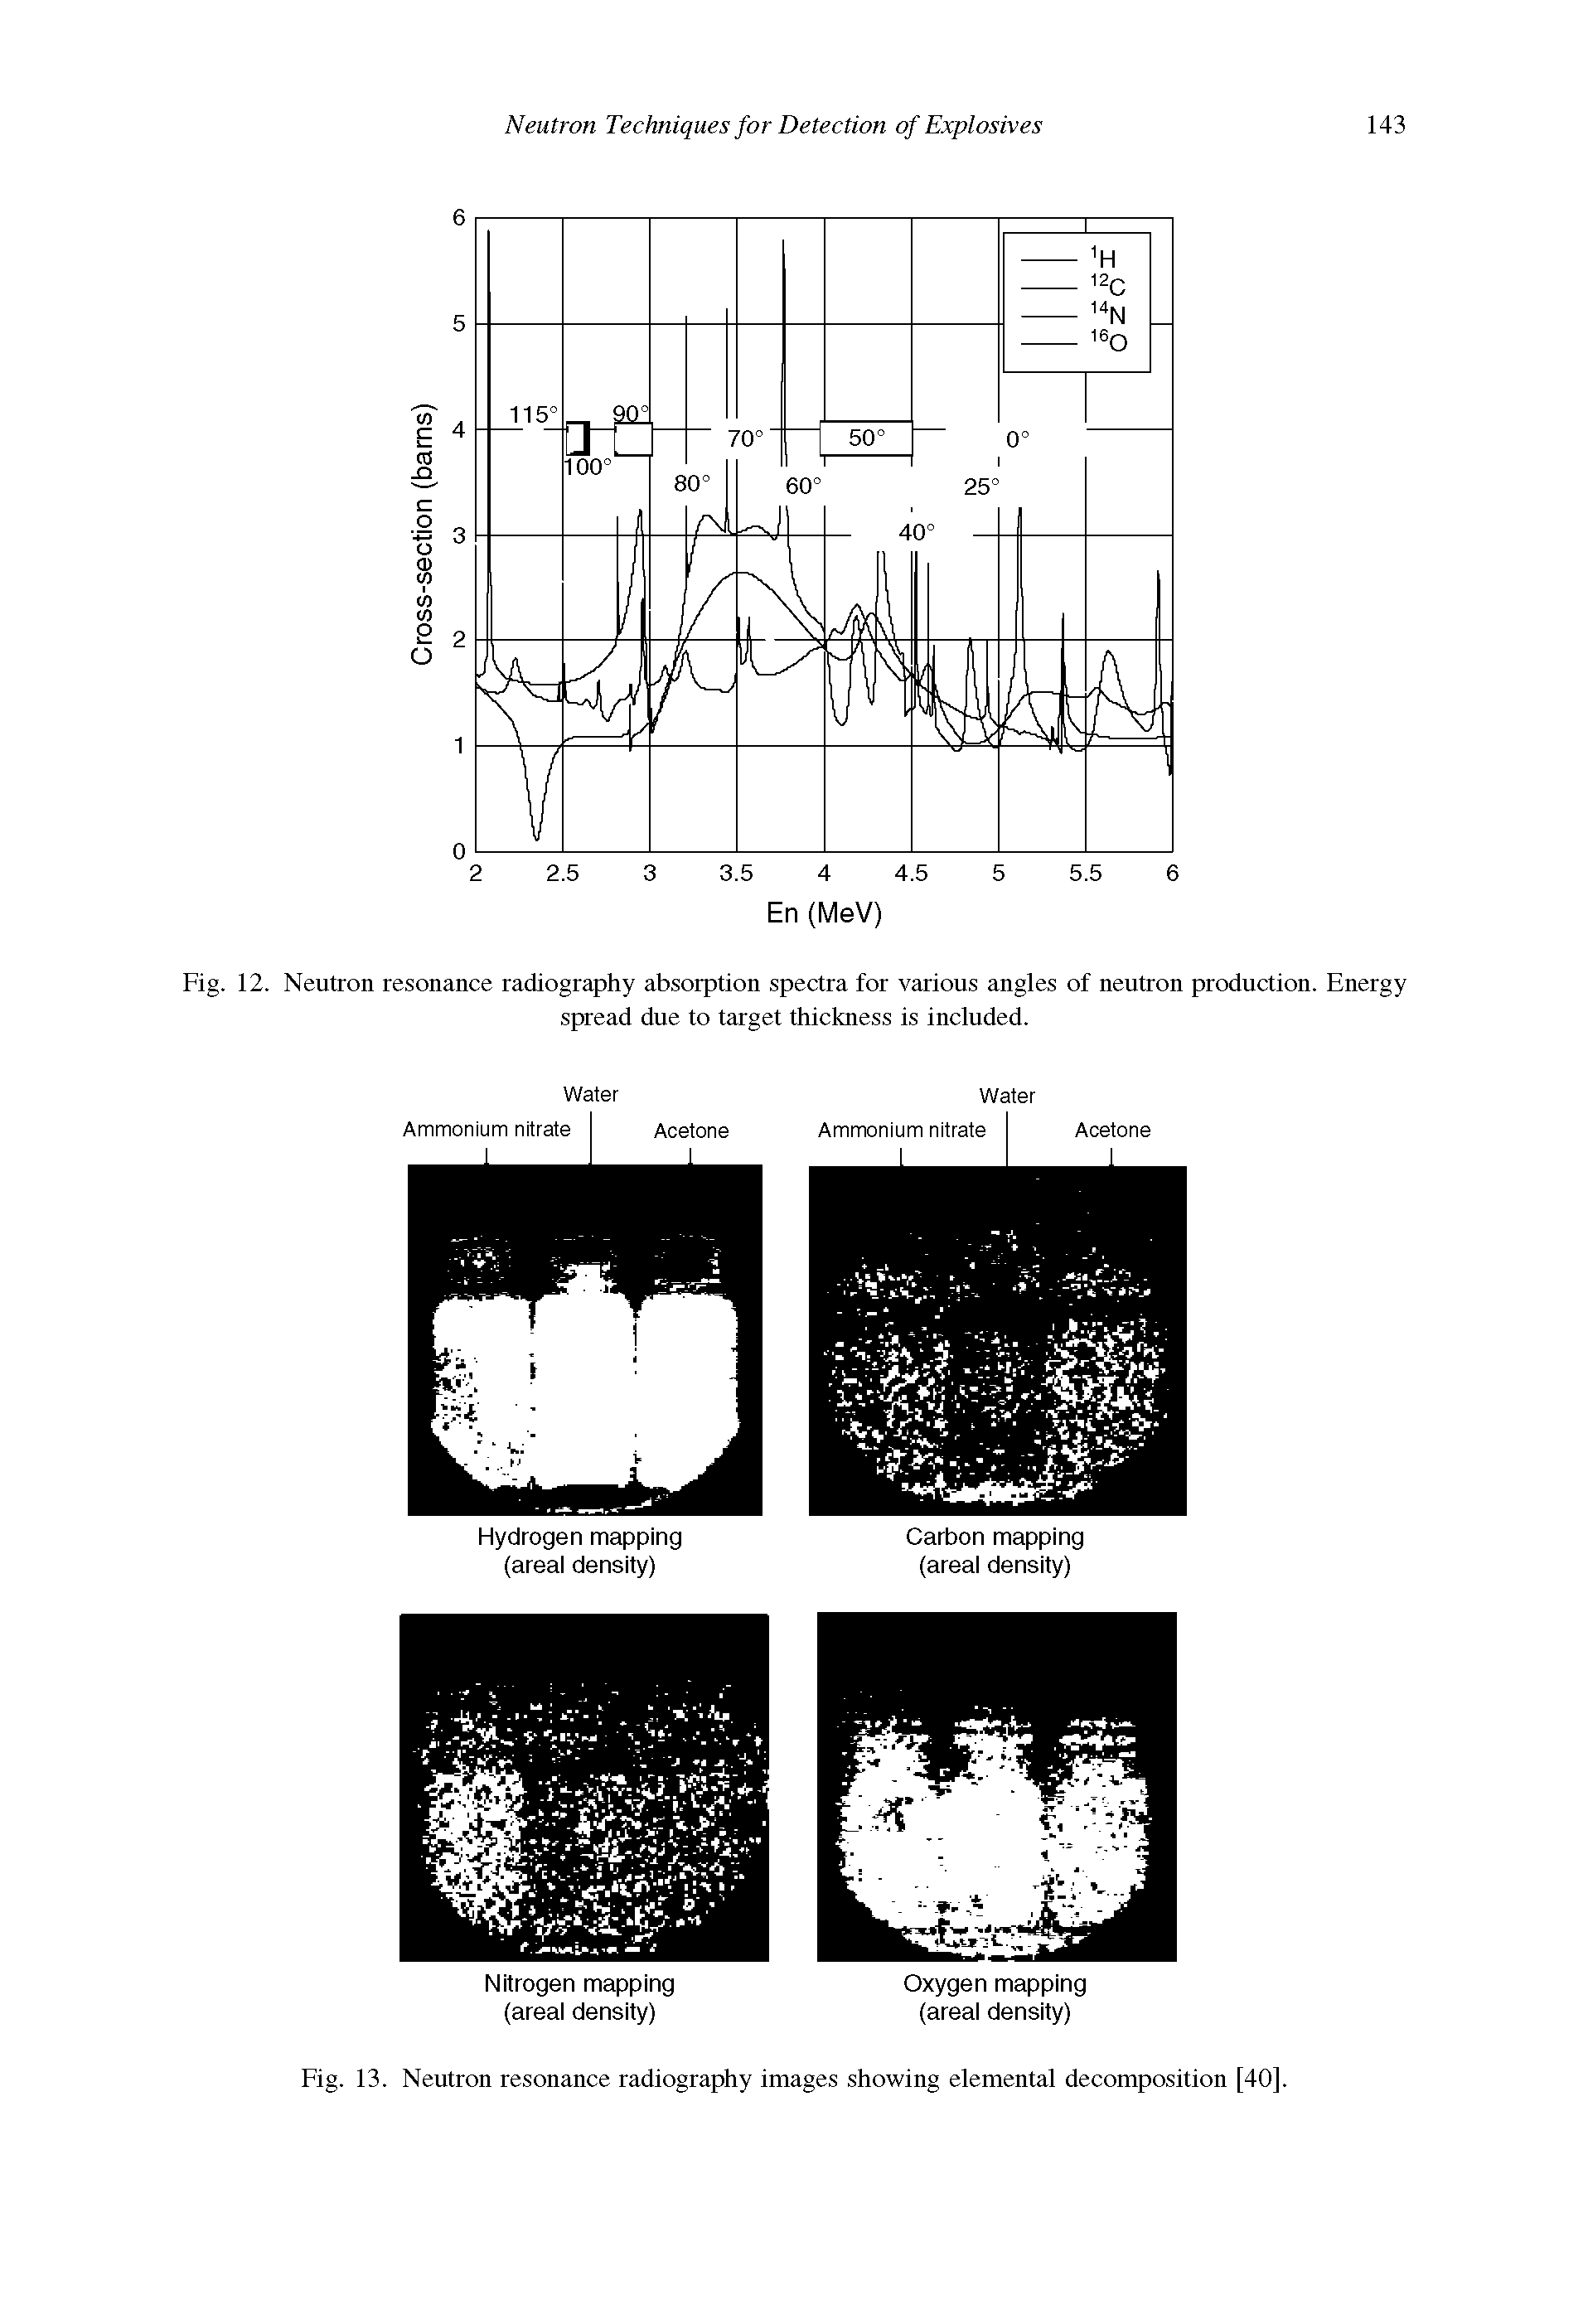 Fig. 13. Neutron resonance radiography images showing elemental decomposition [40].